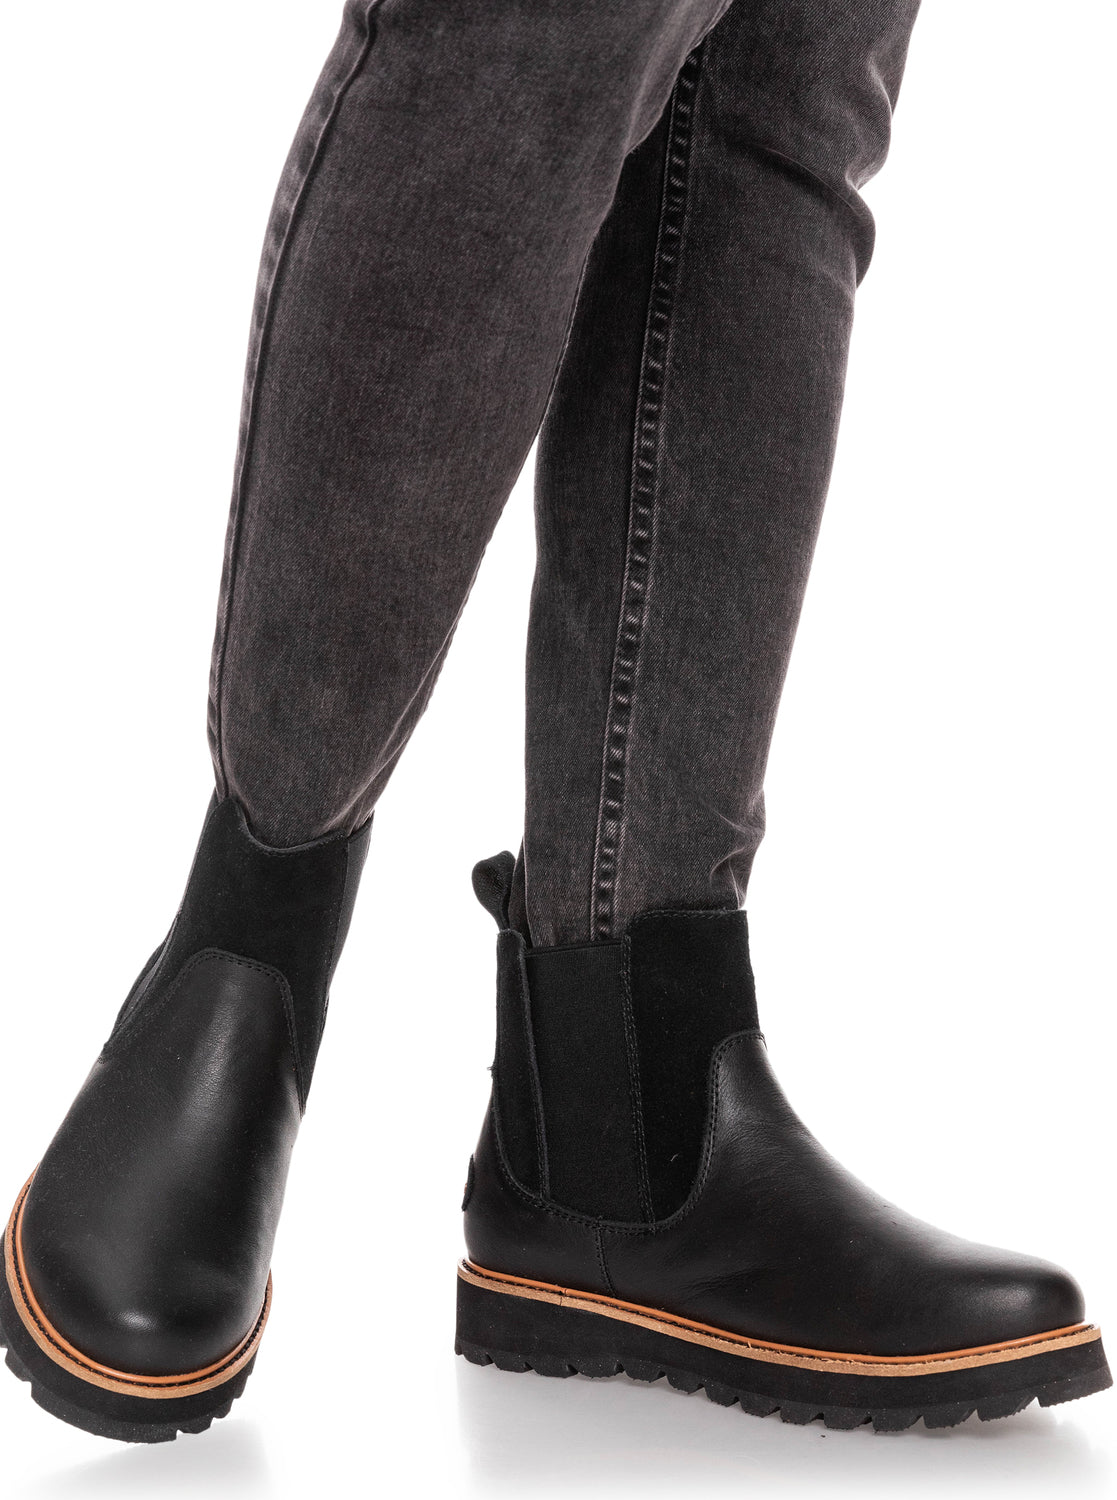 Roxy leather knee-high boots